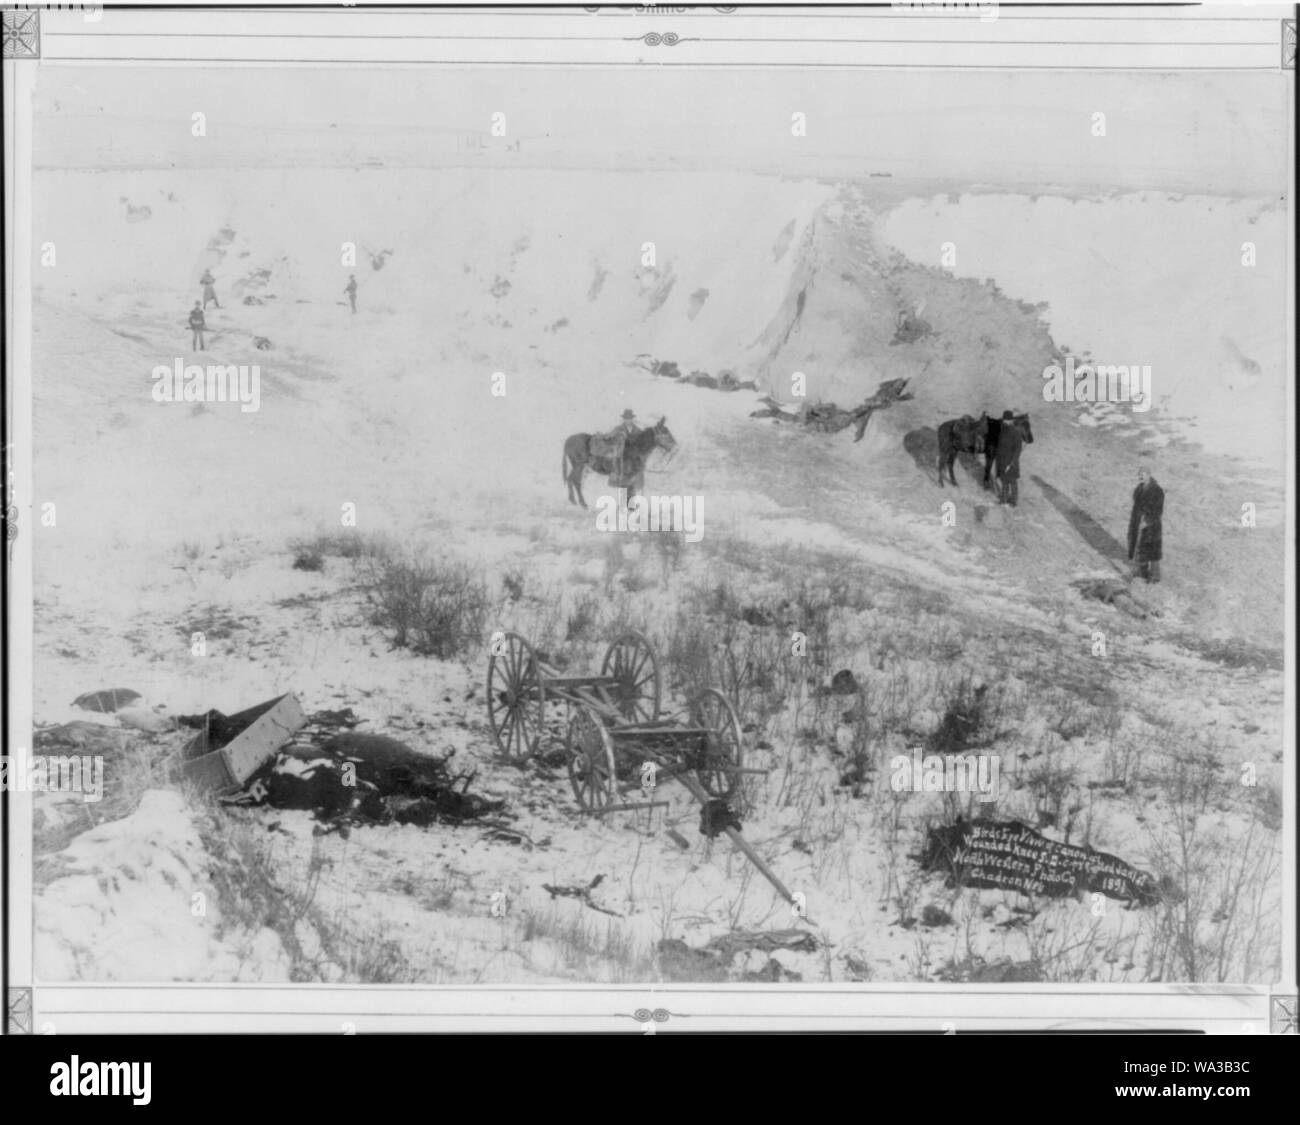 Birds-eye view of canyon at Wounded Knee, S.D. Stock Photo